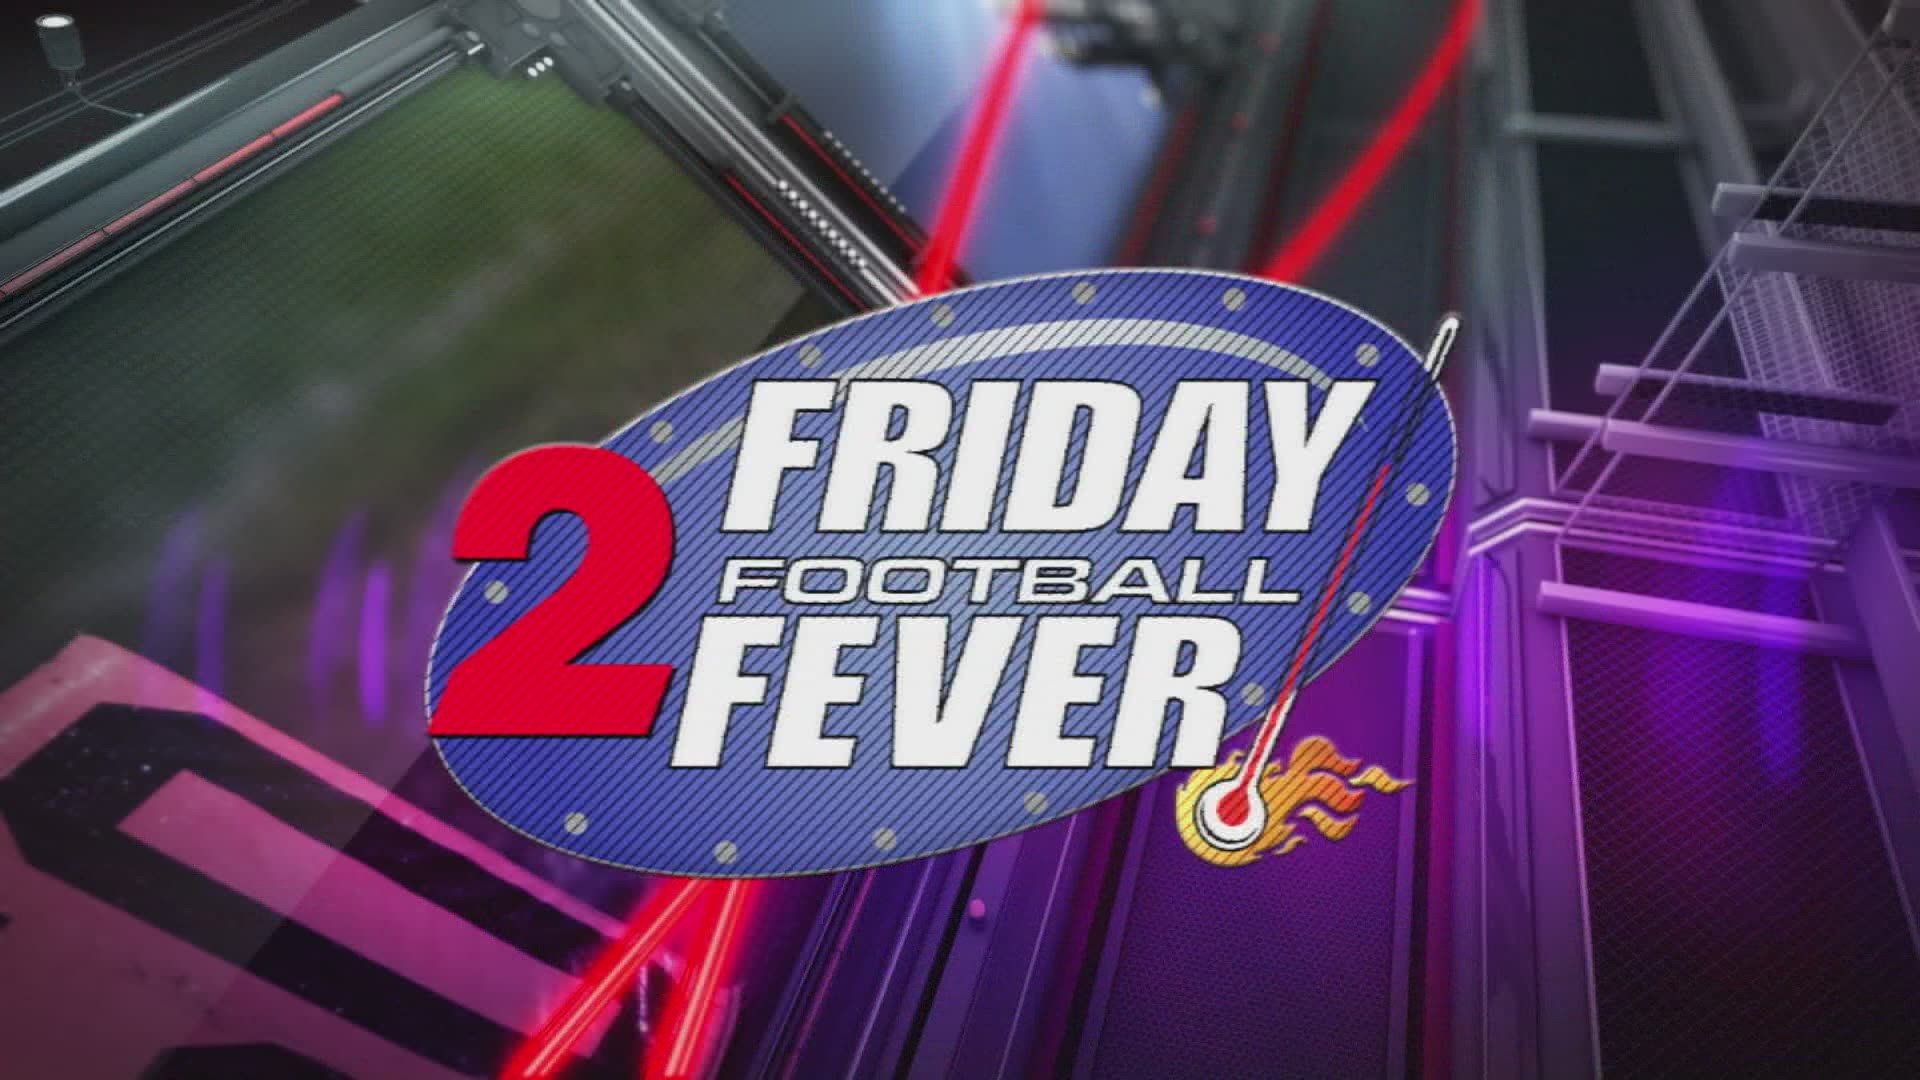 Top 5 plays for week 3 of Friday Football Fever on WFMY News 2.